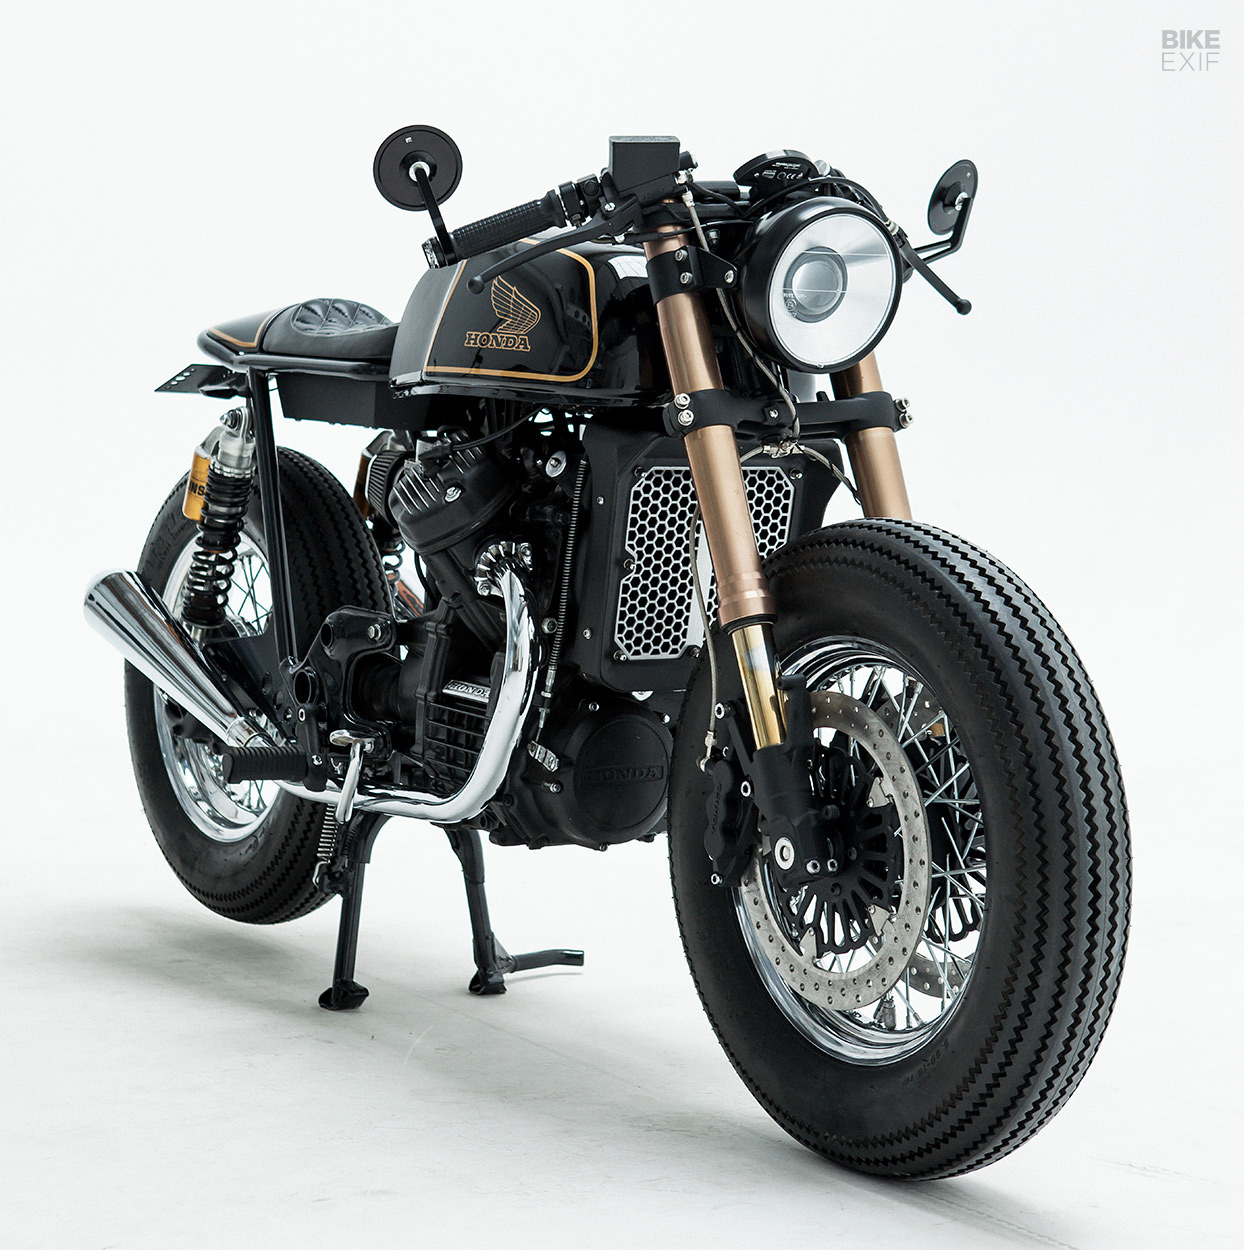 Honda CX500 cafe racer by Invader Cycle Company